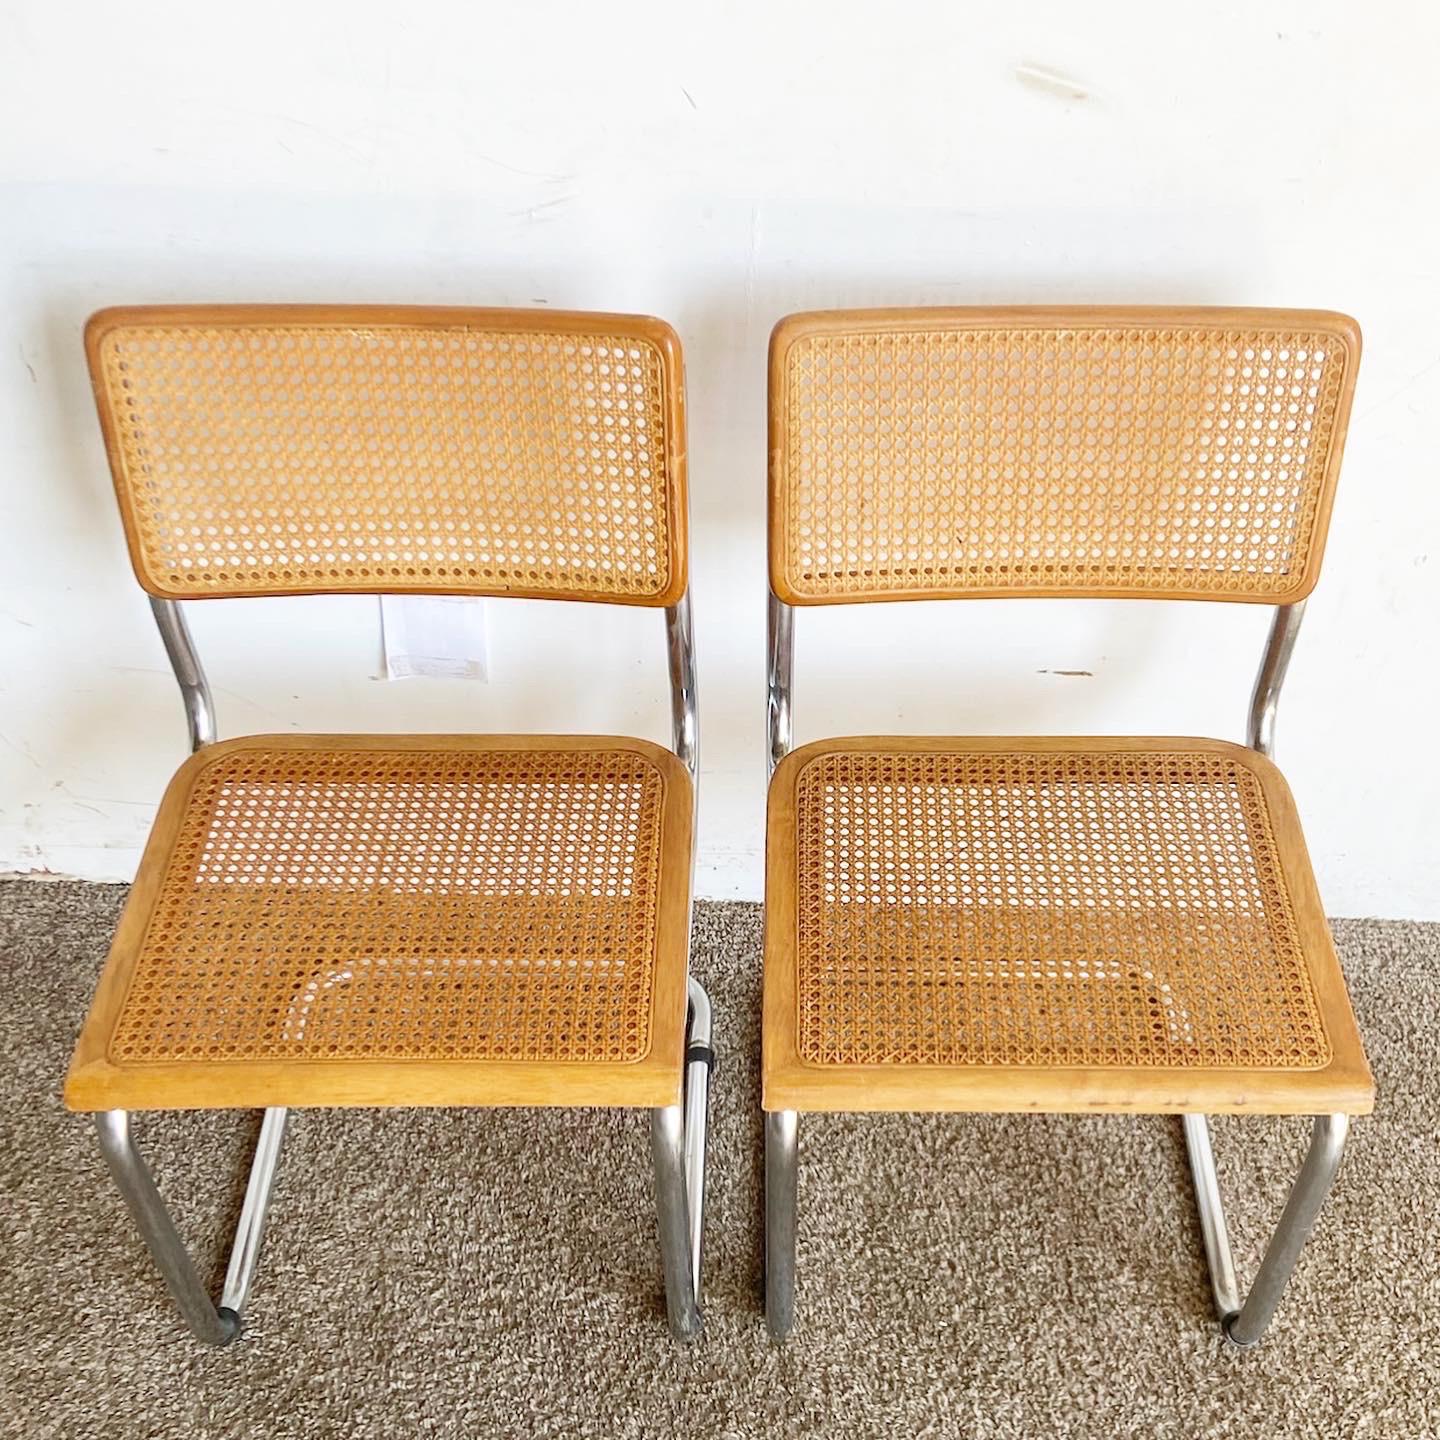 Elevate your dining room with this pair of Mid Century Modern Cane and Chrome Cantilever Dining Chairs. These chairs masterfully combine chrome frames and cane backrests in an iconic cantilever design, offering a blend of modern aesthetics and